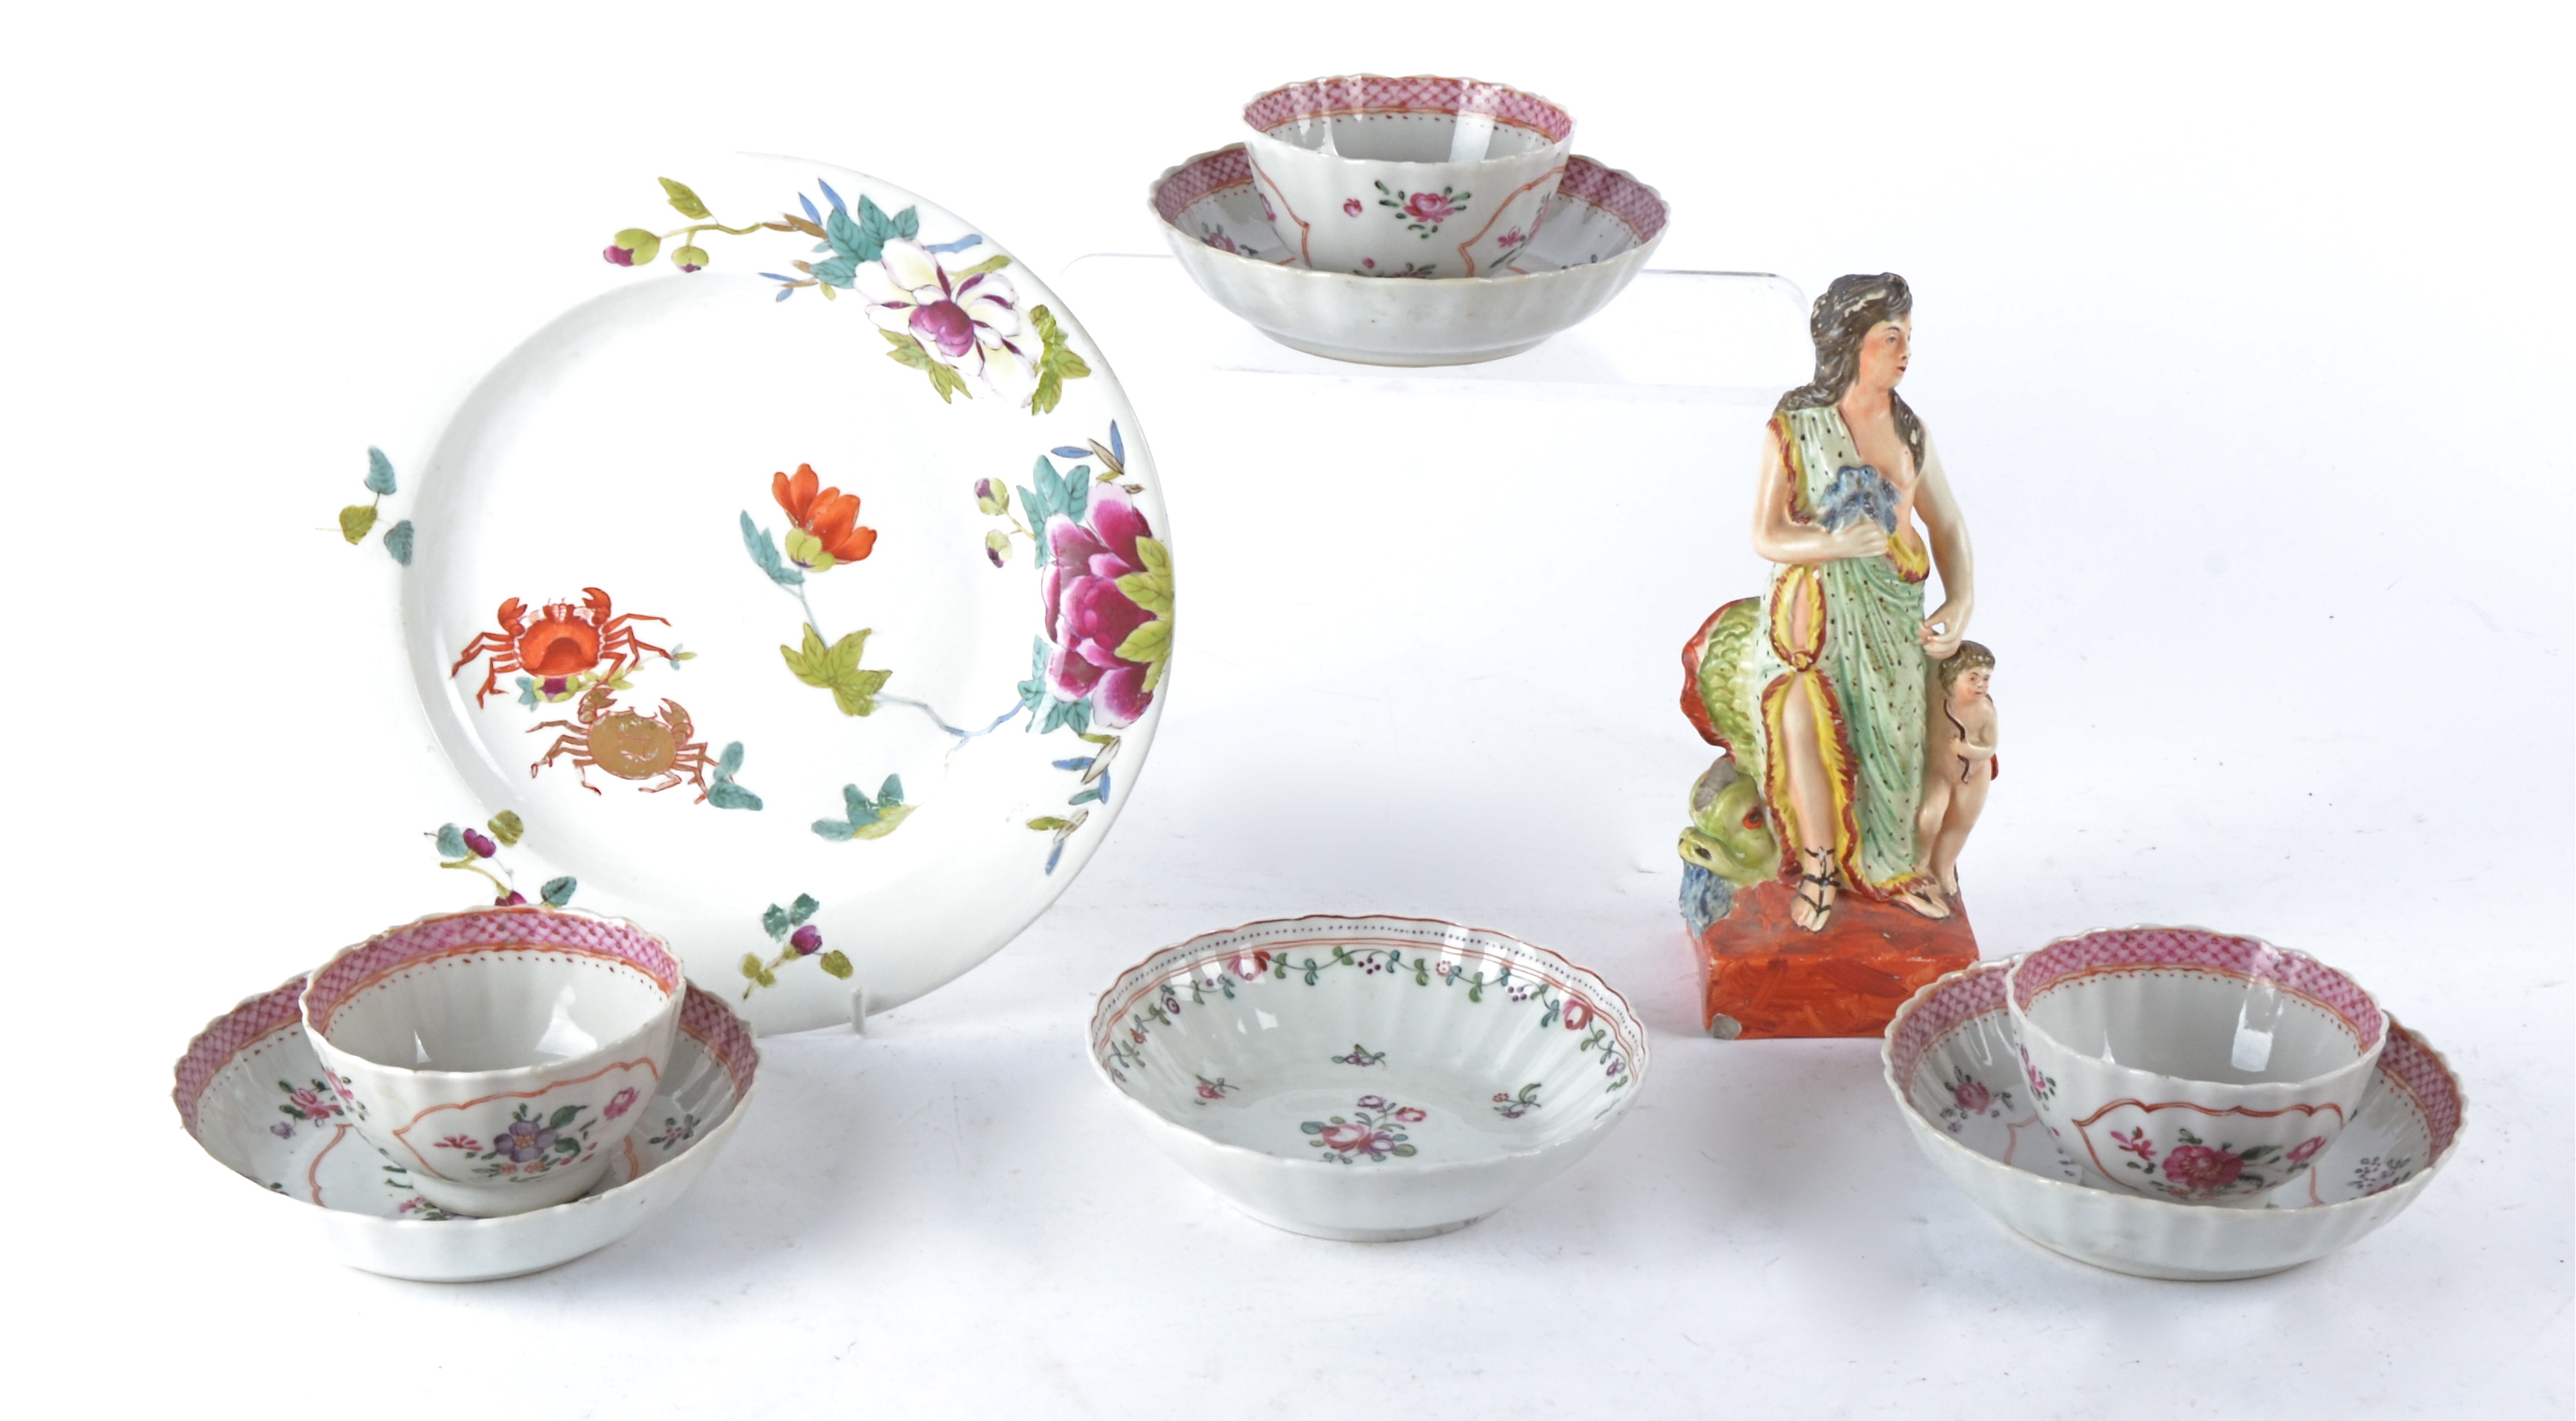 Three 18th Century Newhall porcelain tea bowls and saucers after Chinese export wares, each with - Image 2 of 3